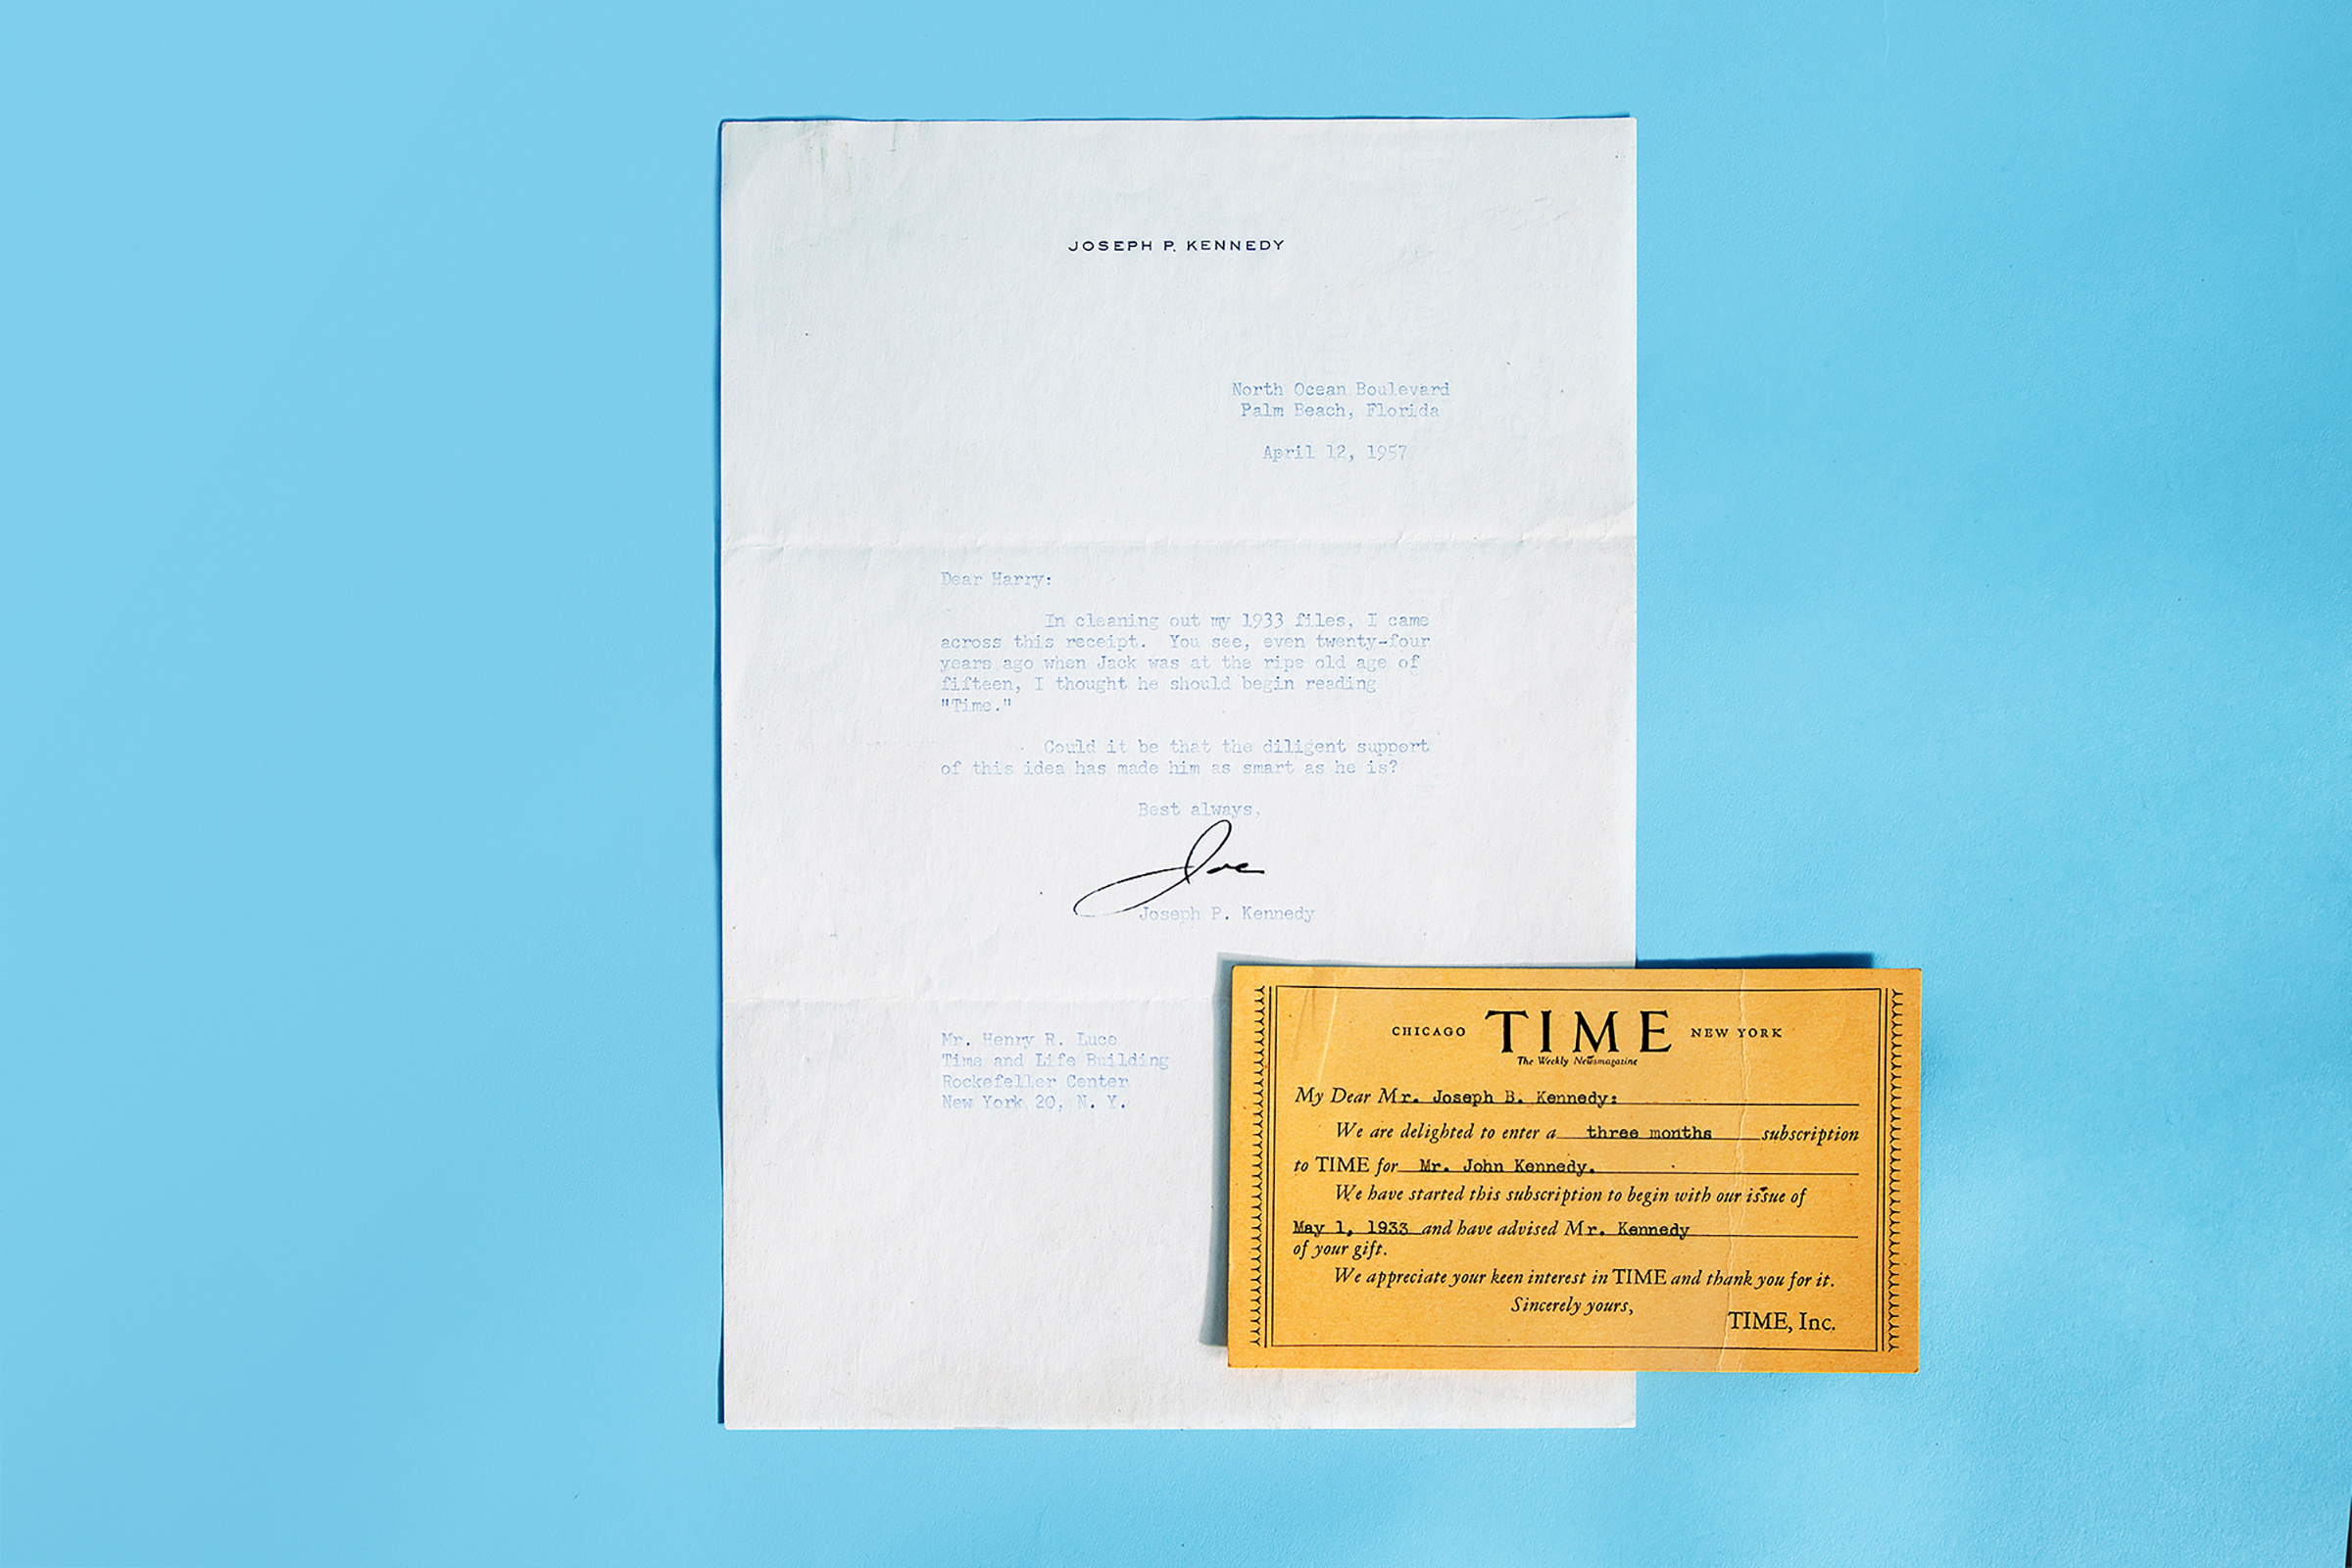 John F. Kennedy TIME Subscription: Joe Kennedy, father of President John F. Kennedy, sent a letter to Luce in 1957 with a gift subscription receipt enclosed. Kennedy wrote, “You see, even twenty-four years ago when Jack was at the ripe old age of fifteen, I thought he should begin reading ‘Time.’ Could it be that the diligent support of this idea has made him as smart as he is?”